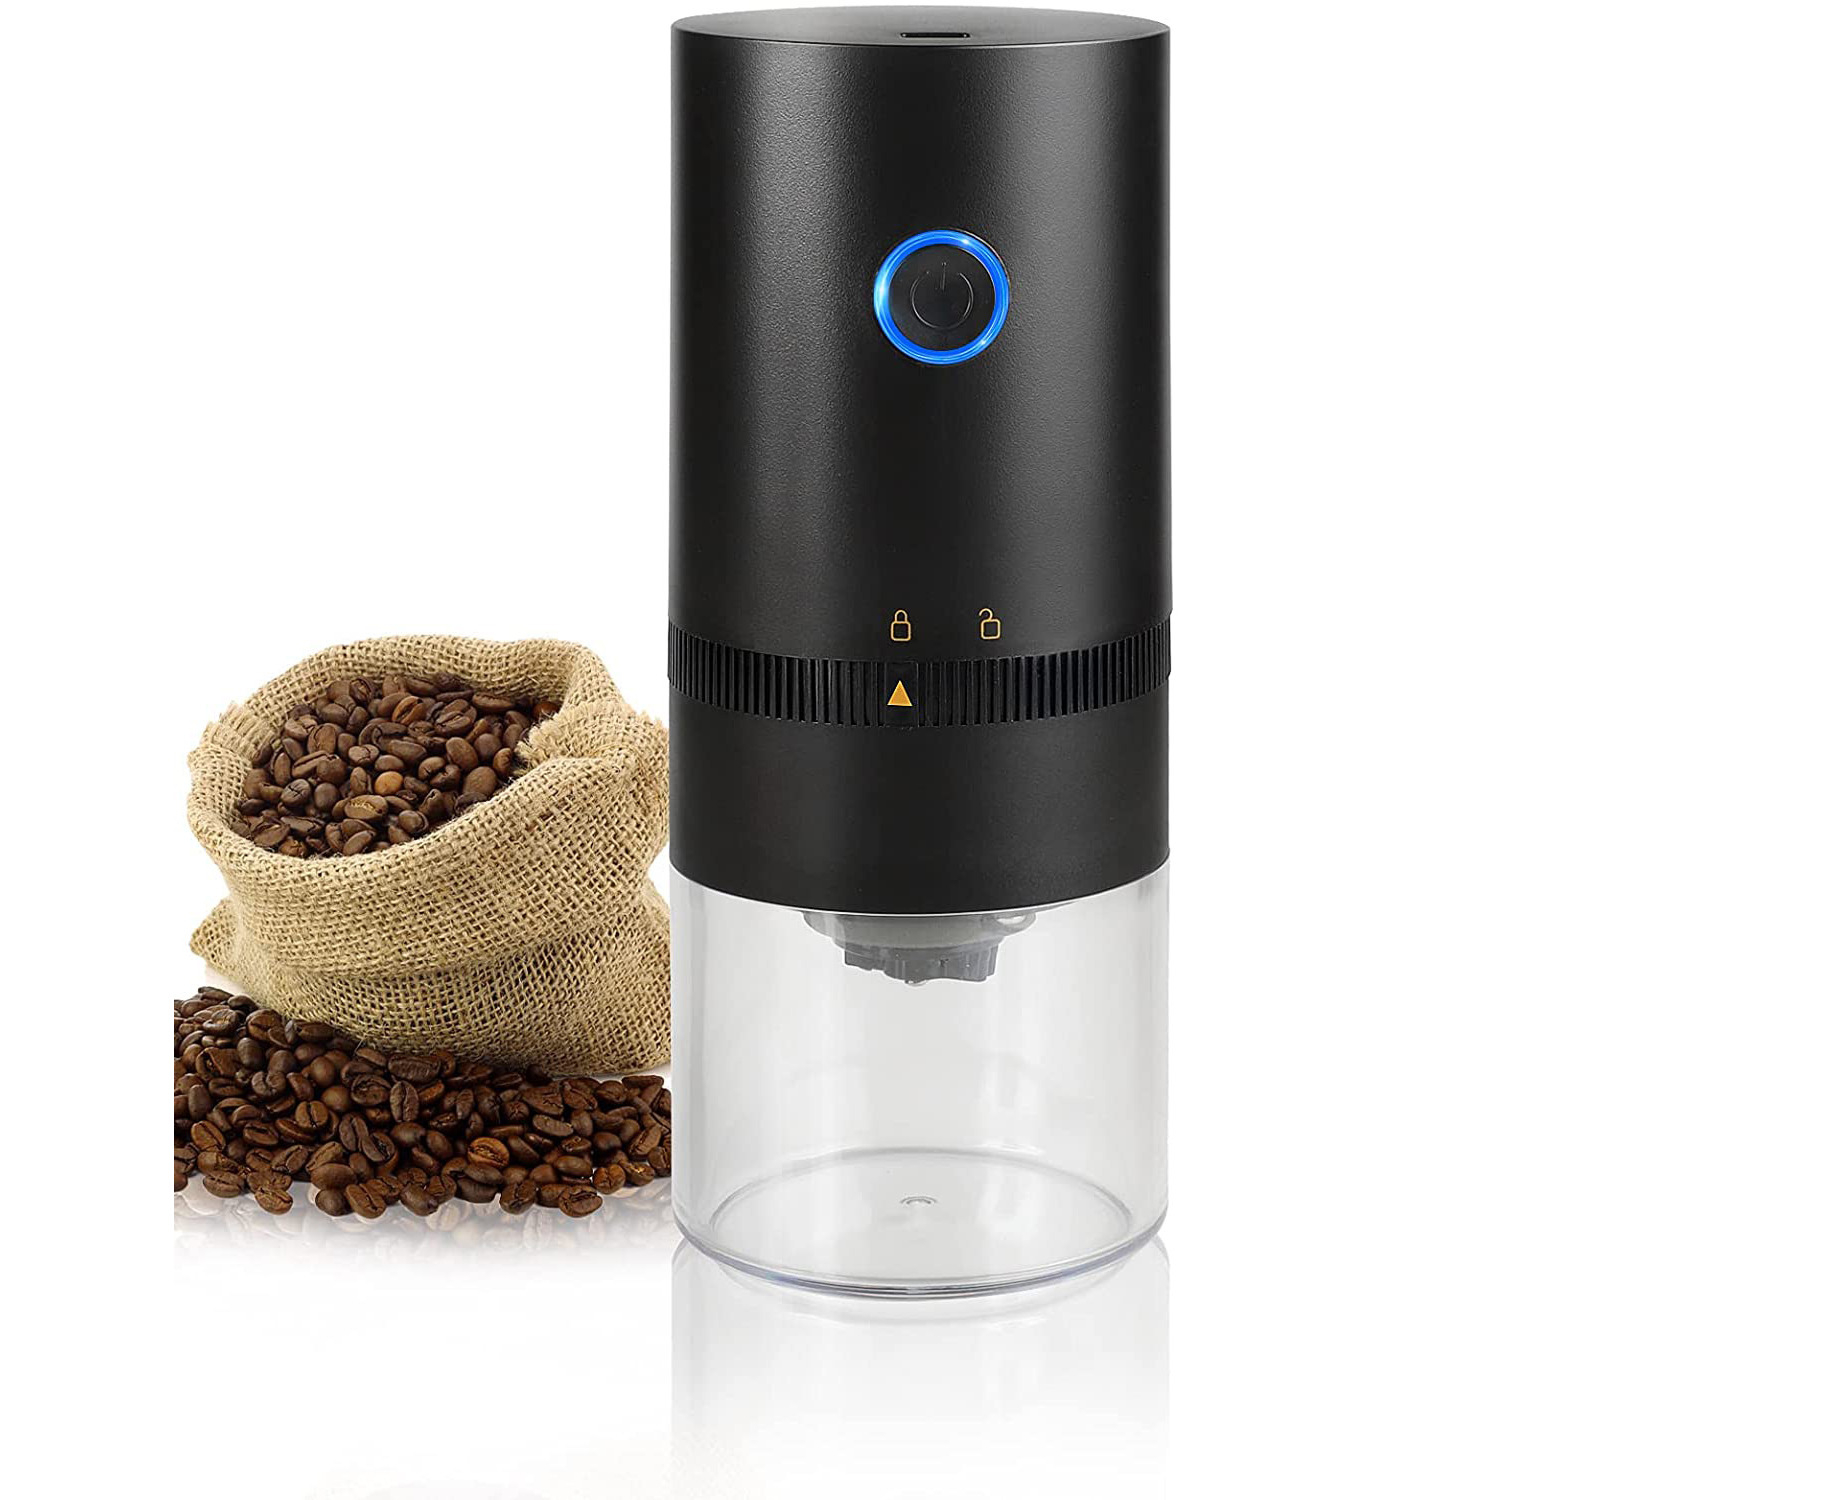 Wancle Spice Grinder for Coffee Bean Peppers Coffee Grinder Electric Nuts 150W Herbs Grains Black 